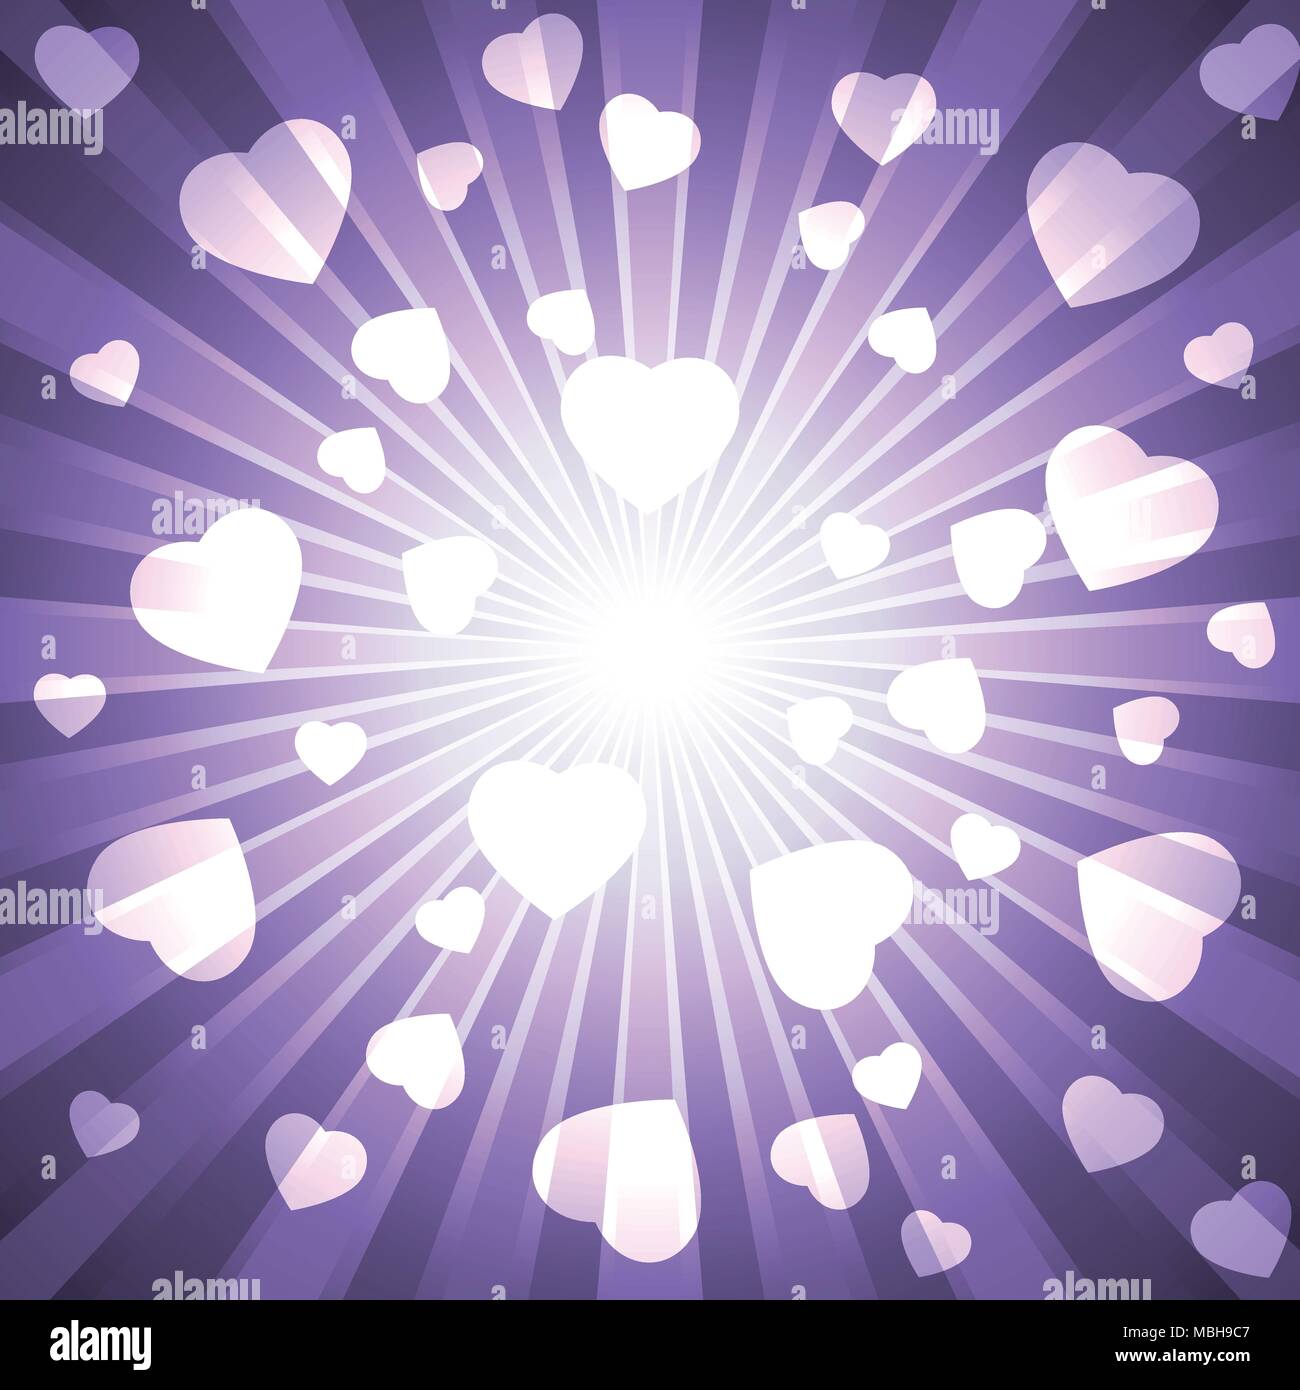 Ultra violet purple burst with many white hearts for abstract vector design background concept Stock Vector